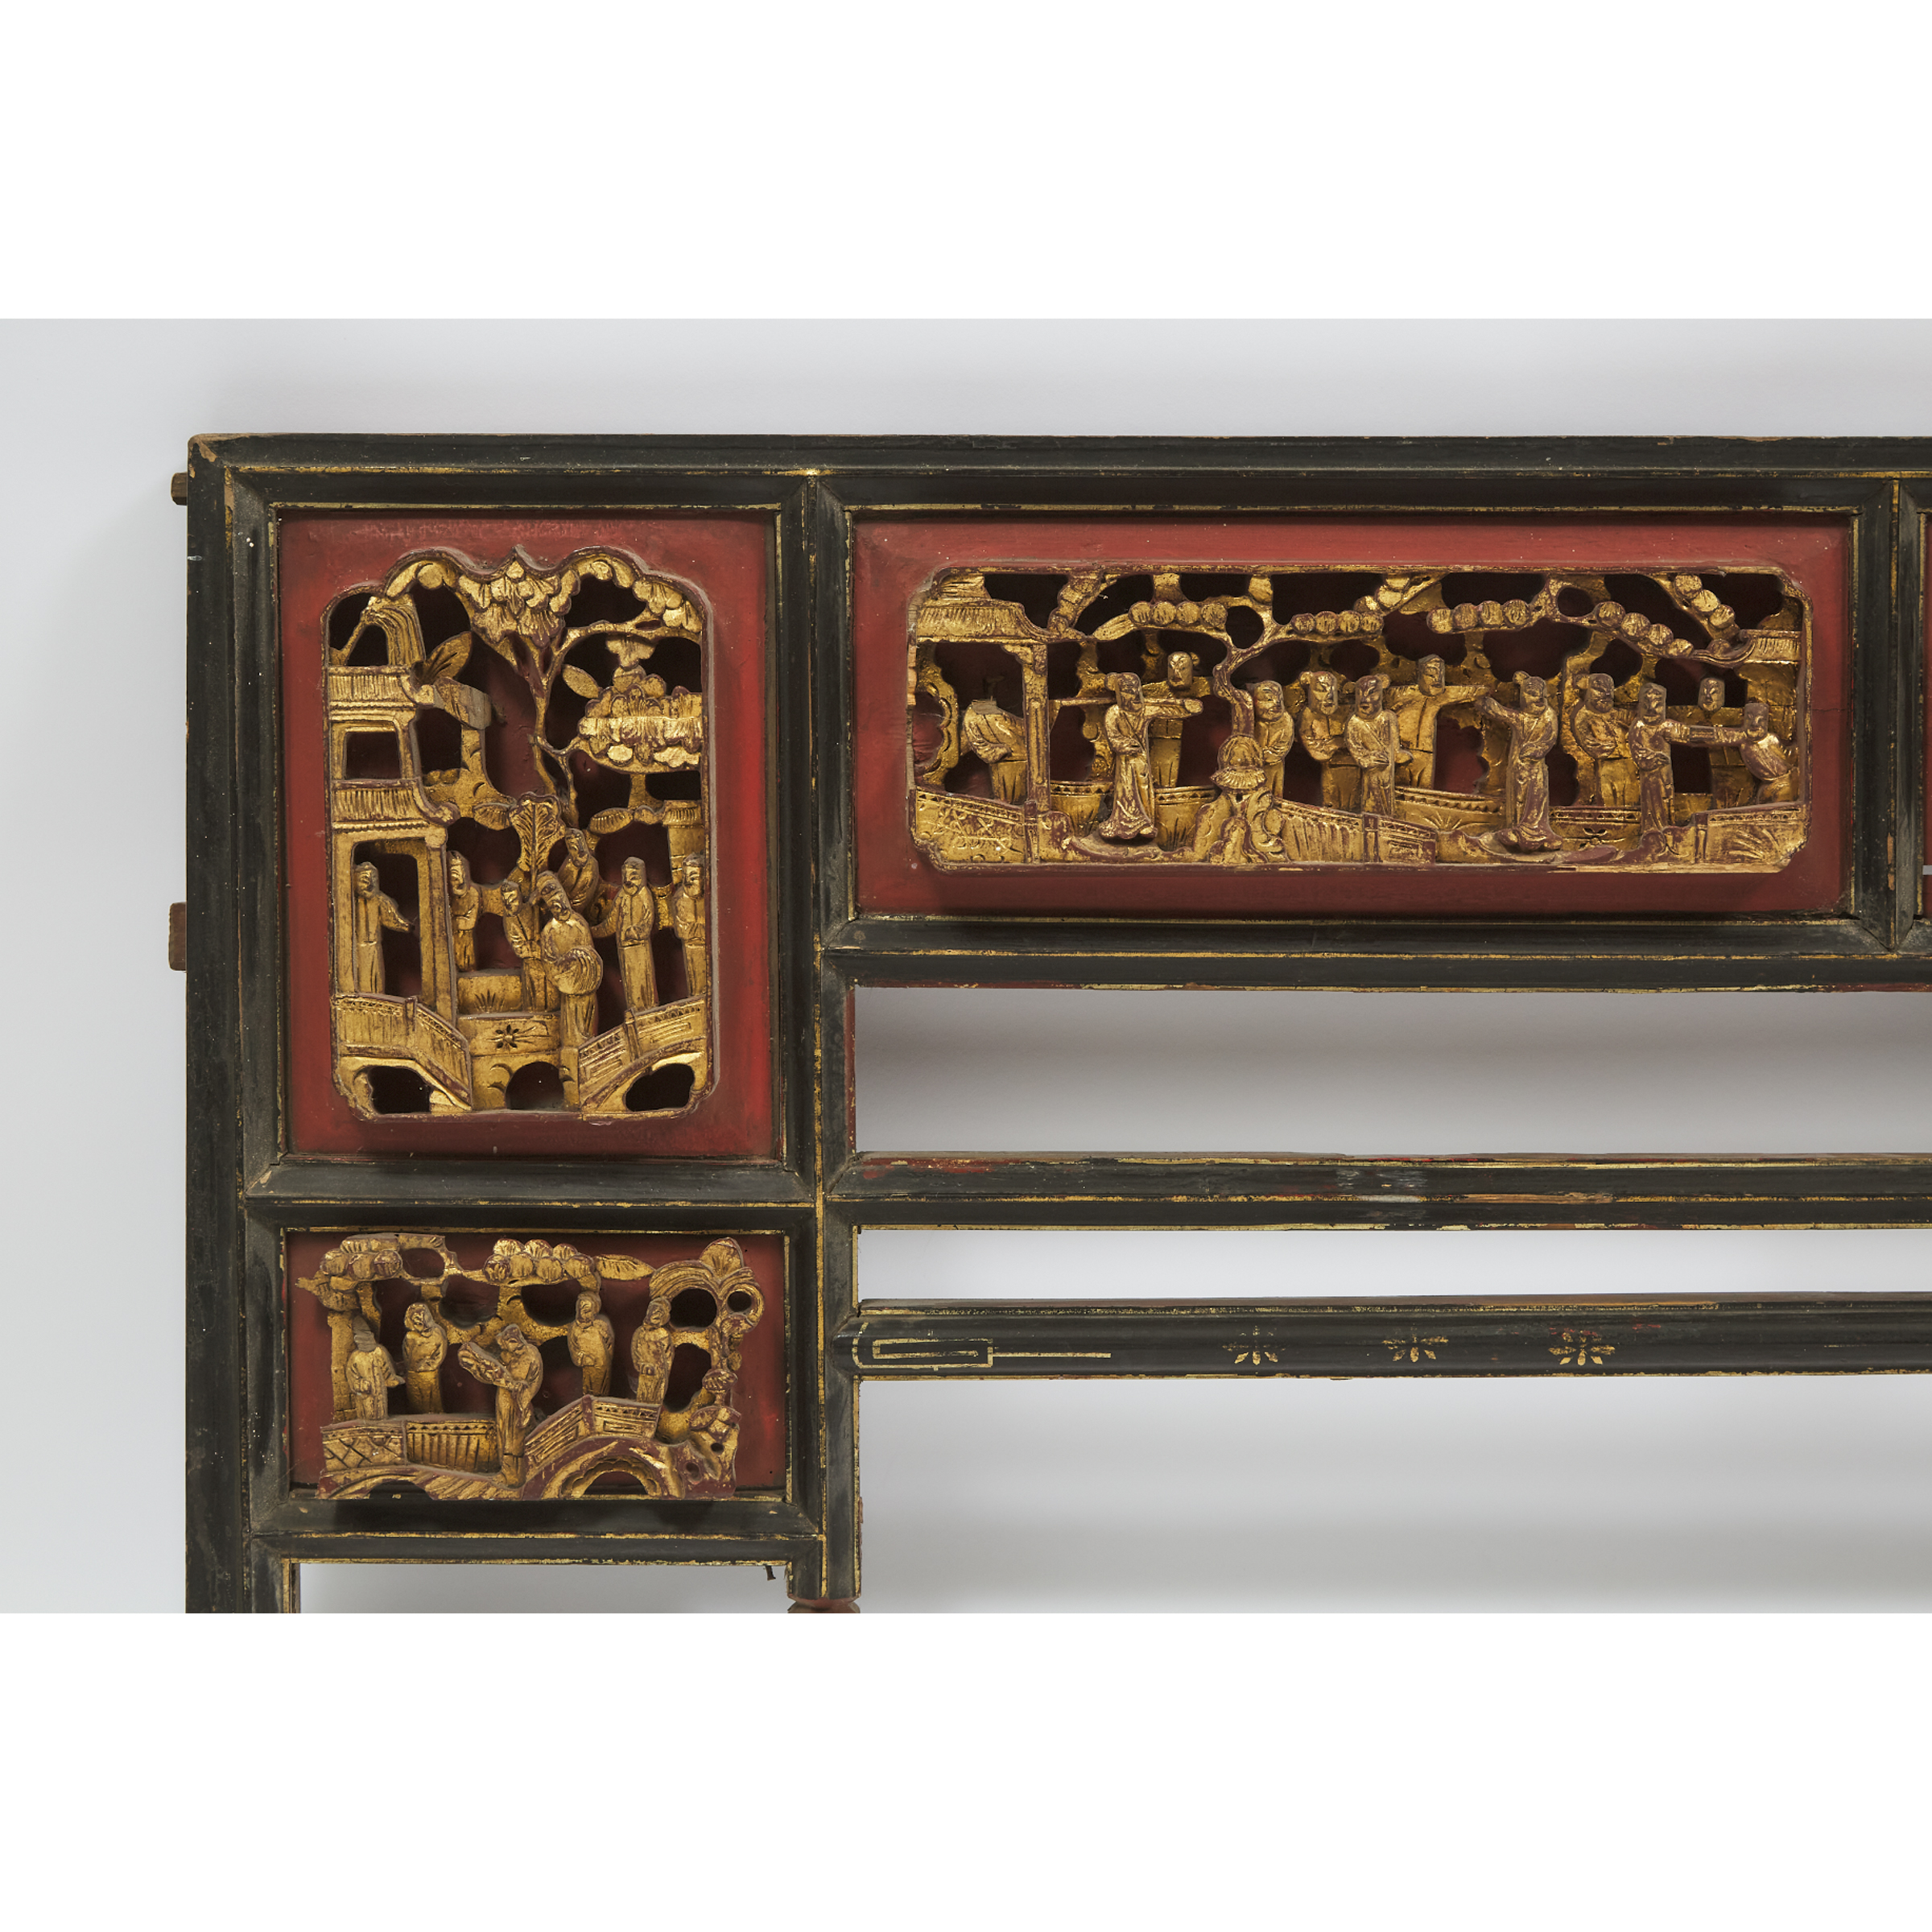 A Chinese Gilt Lacquered and Carved Bed Headboard, Qing Dynasty, 19th Century